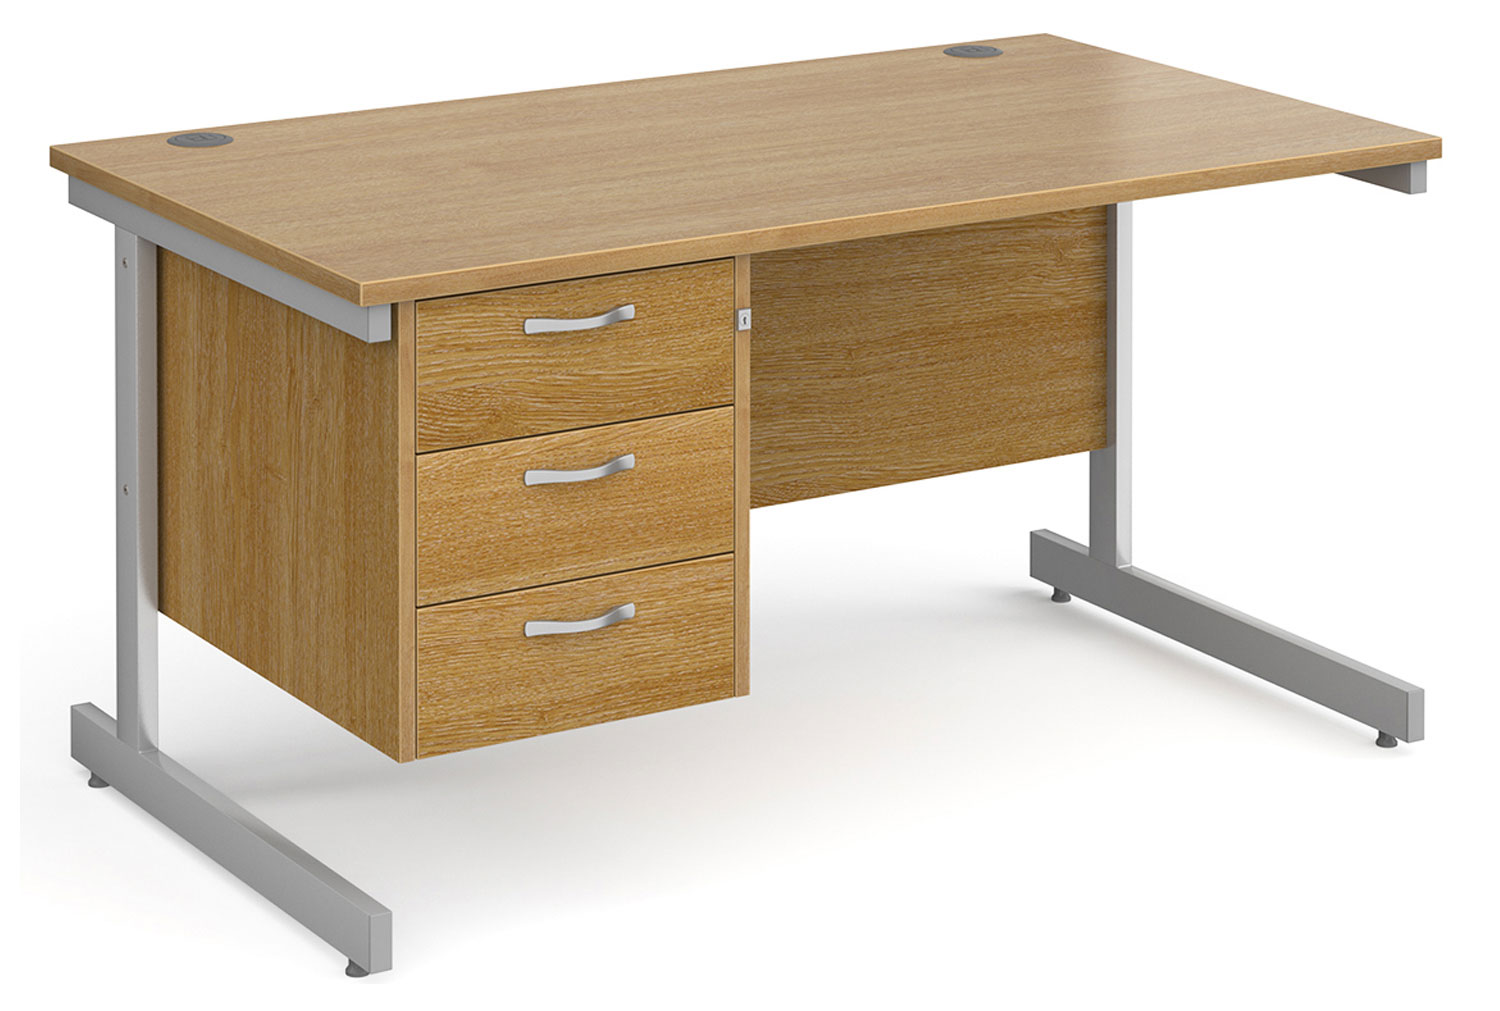 Thrifty Next-Day Rectangular Office Desk 3 Drawers Oak, 140wx80dx73h (cm), Express Delivery